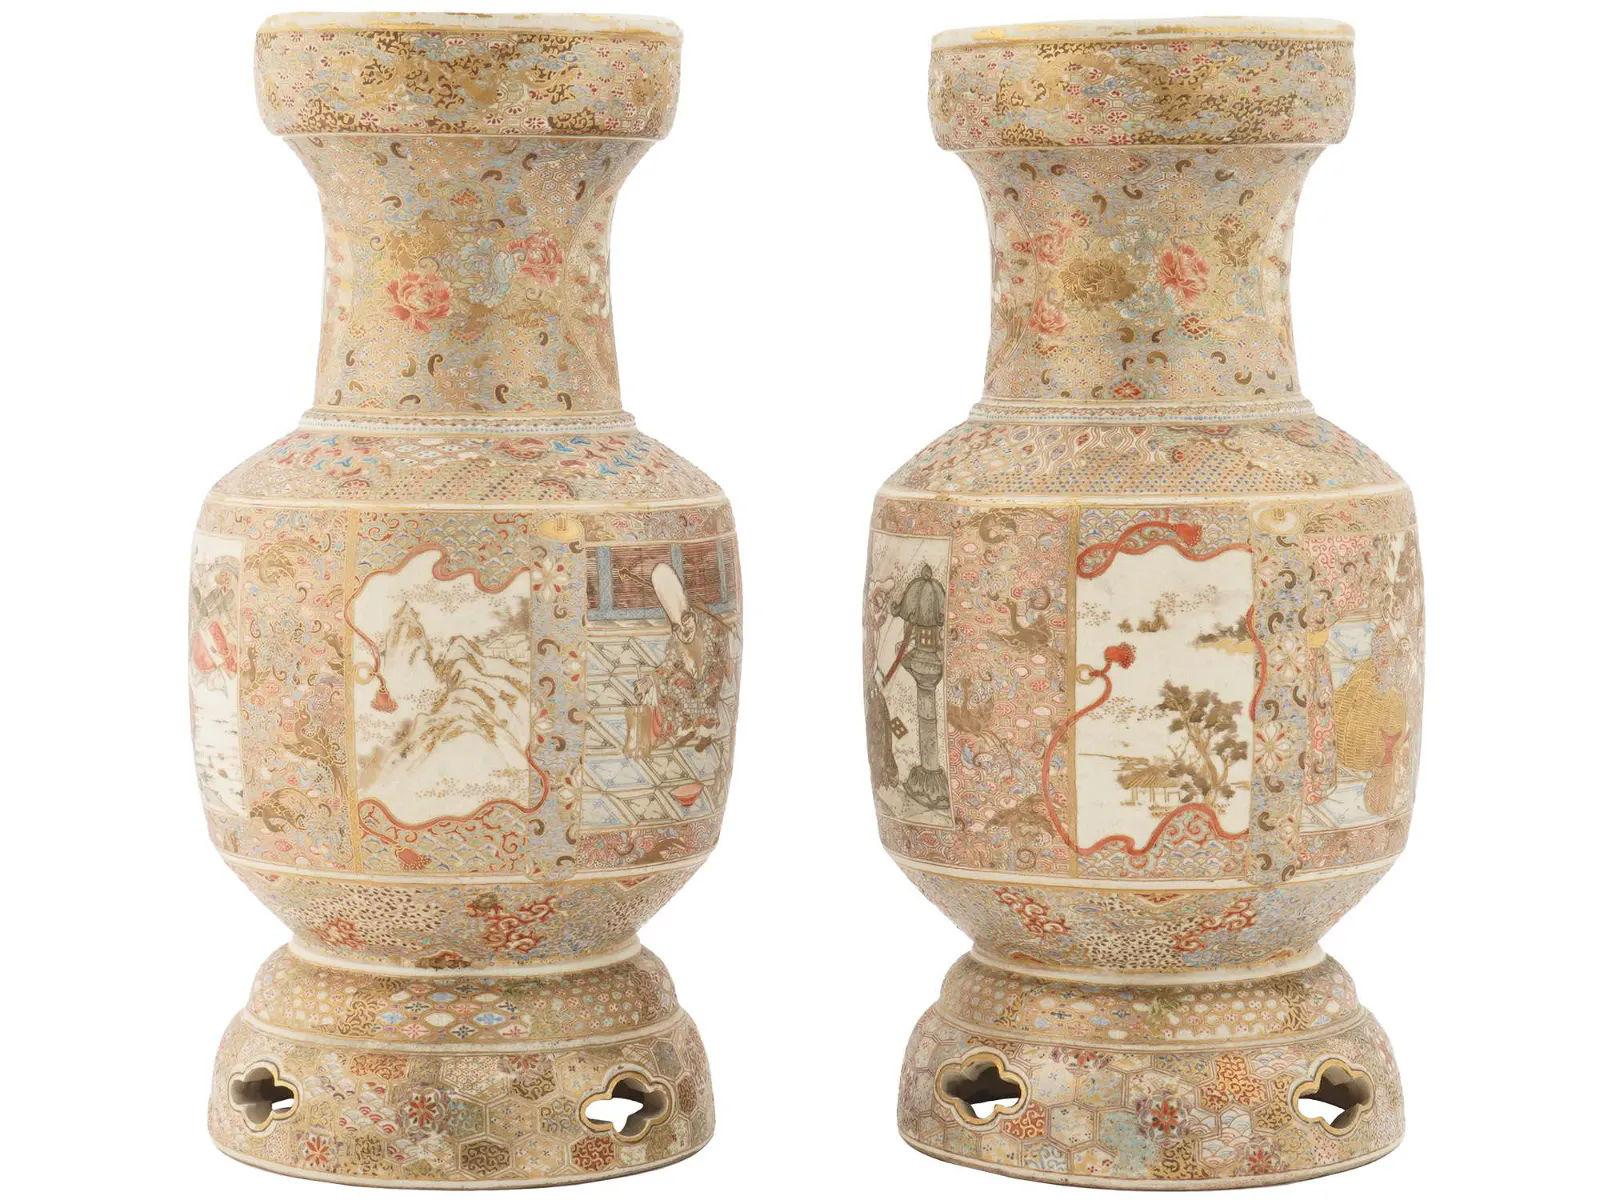 Pair of very fine quality early Meiji period Japanese Satsuma vases.